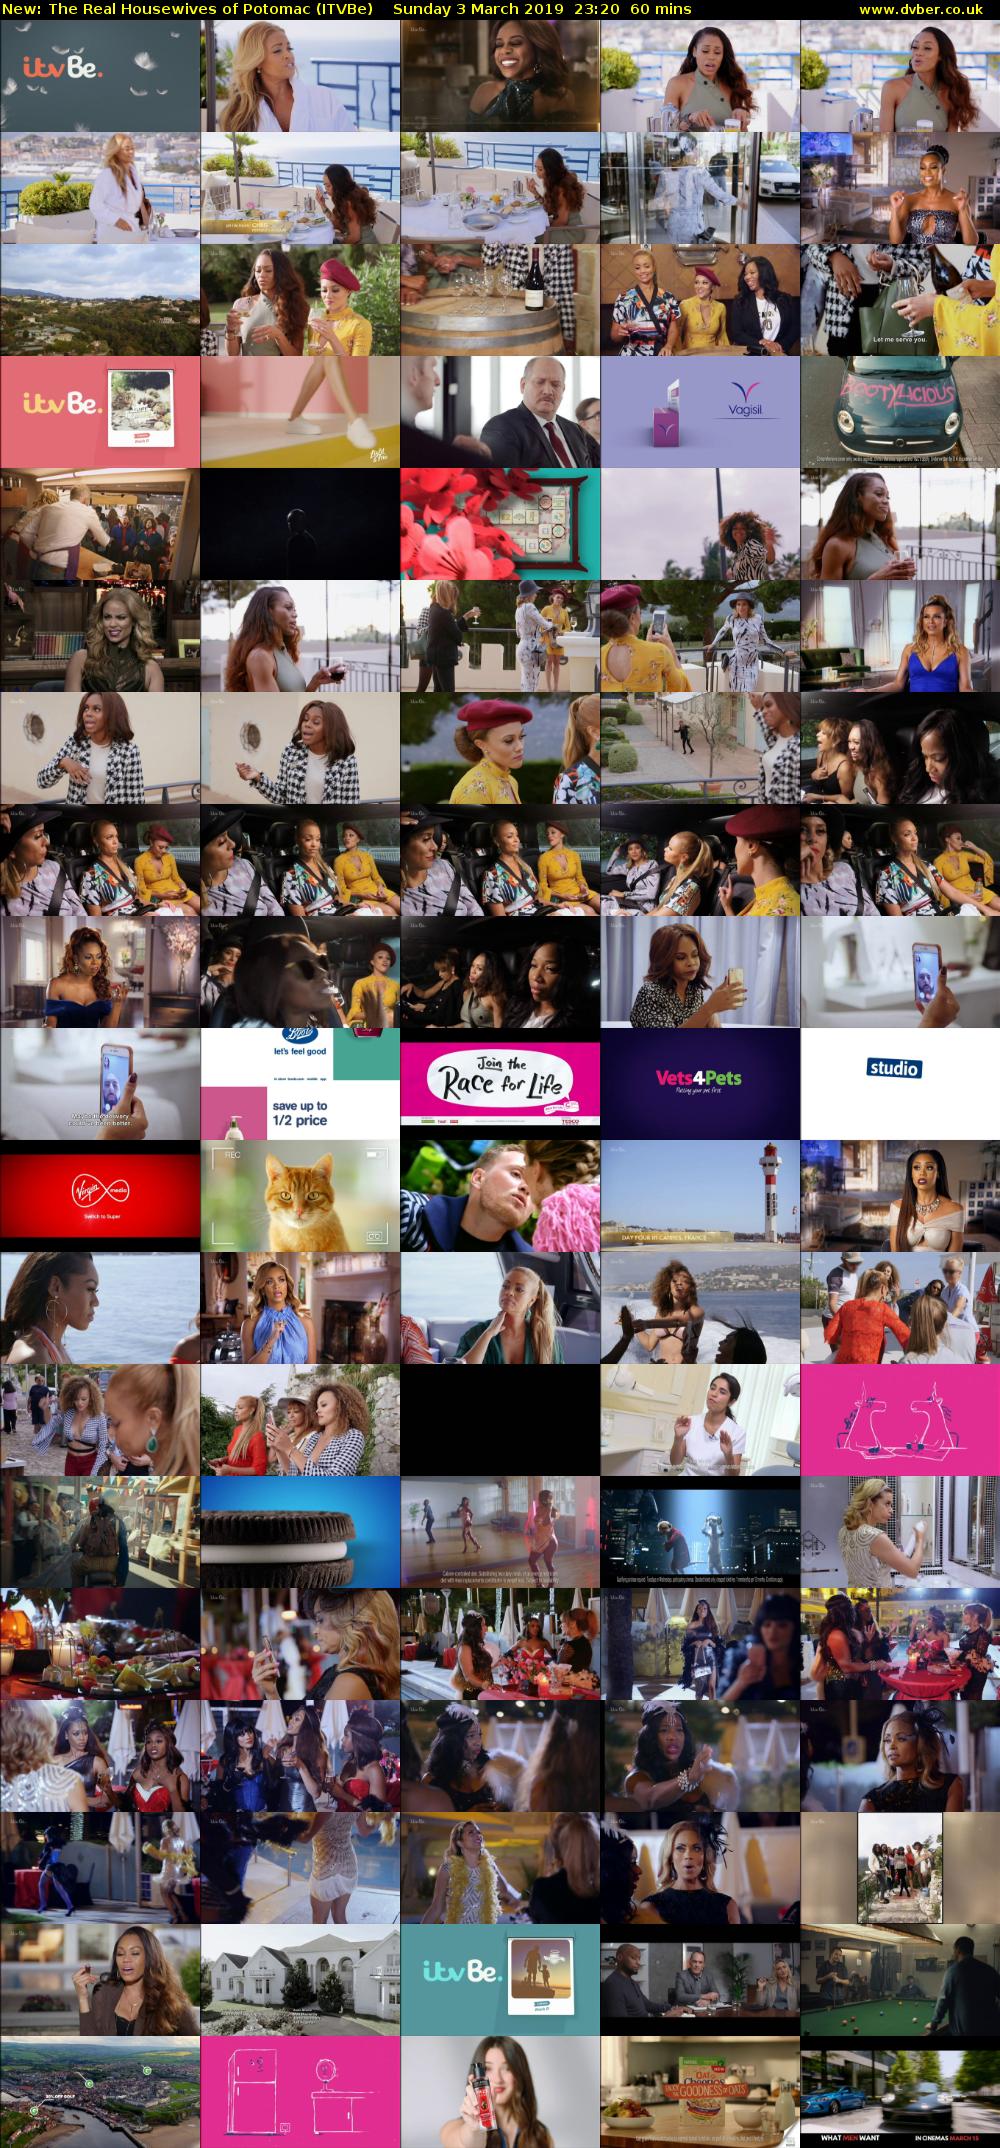 The Real Housewives of Potomac (ITVBe) Sunday 3 March 2019 23:20 - 00:20